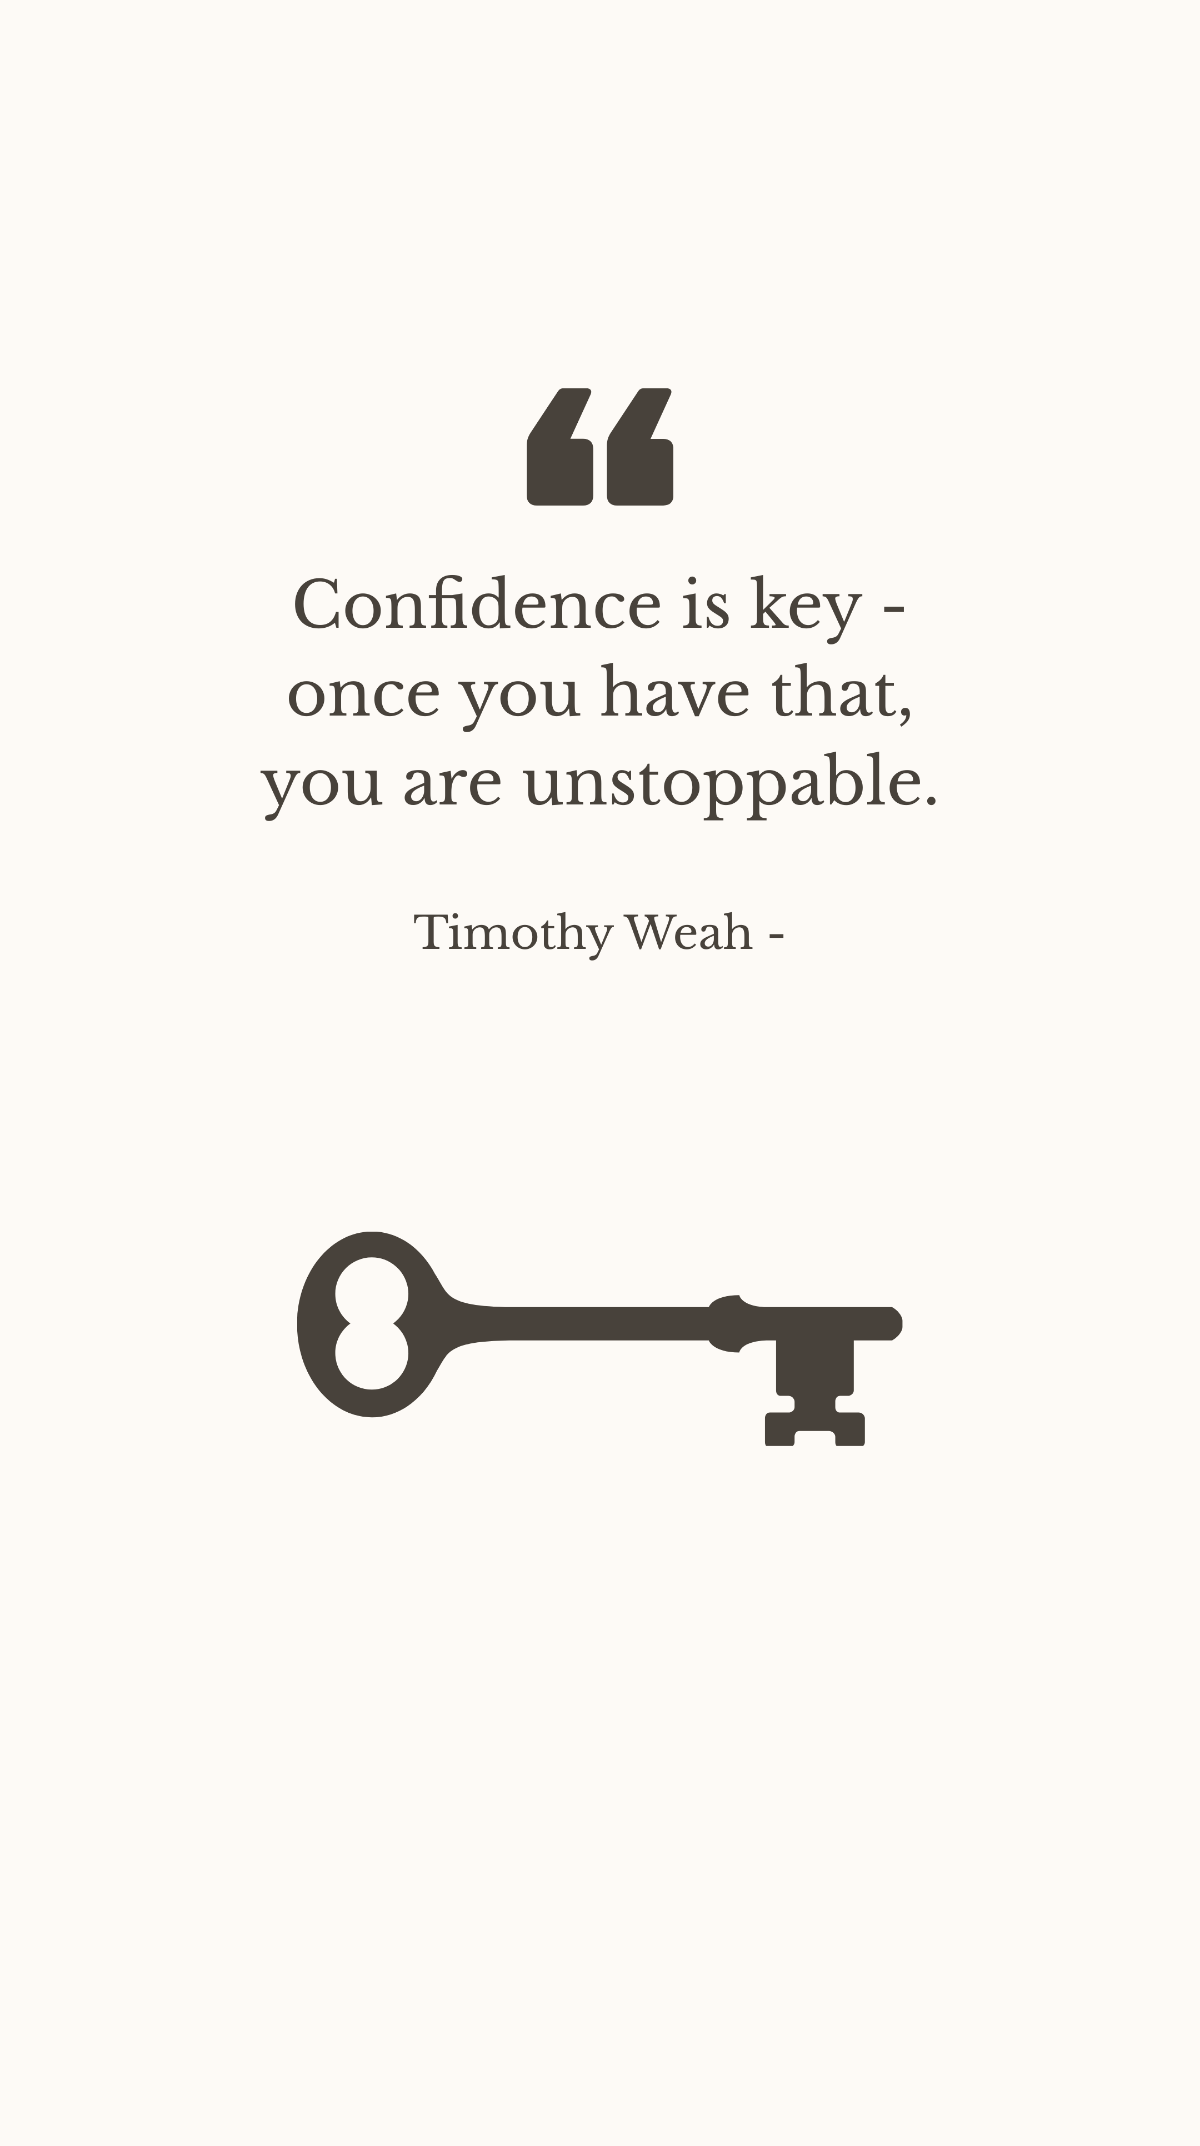 Timothy Weah - Confidence is key - once you have that, you are unstoppable. Template